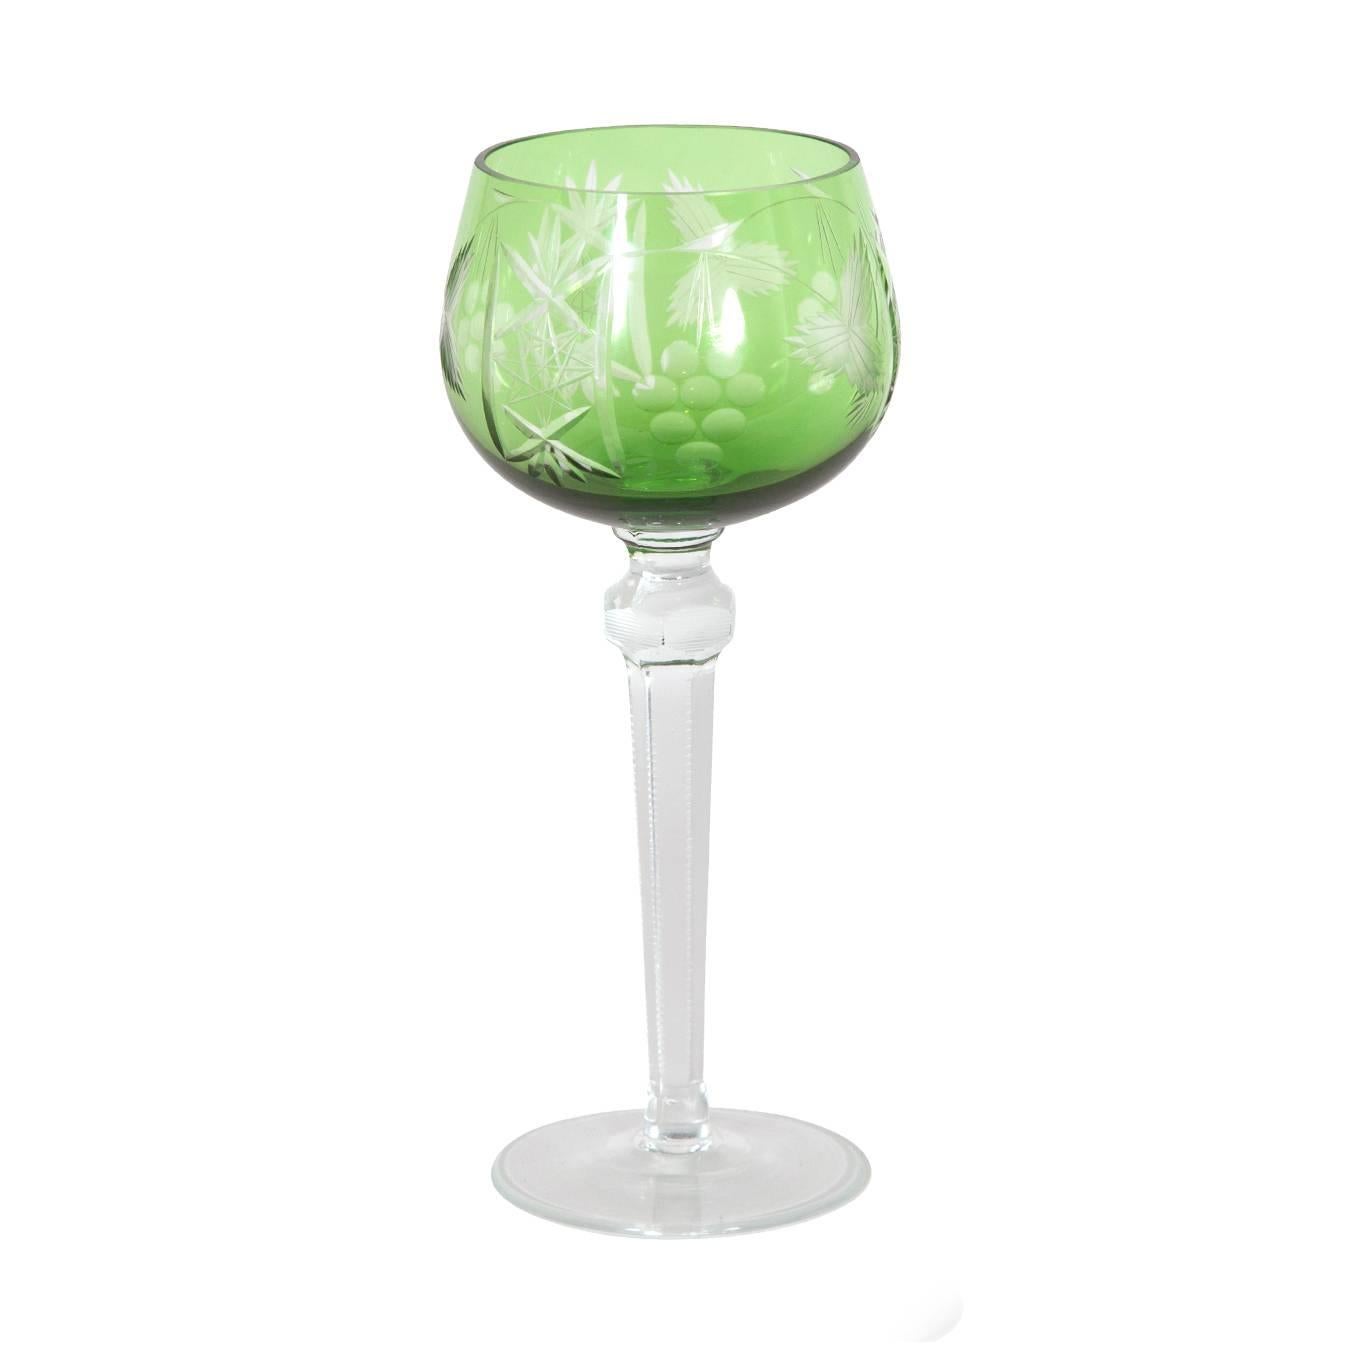 Set of four emerald etched glass goblets.